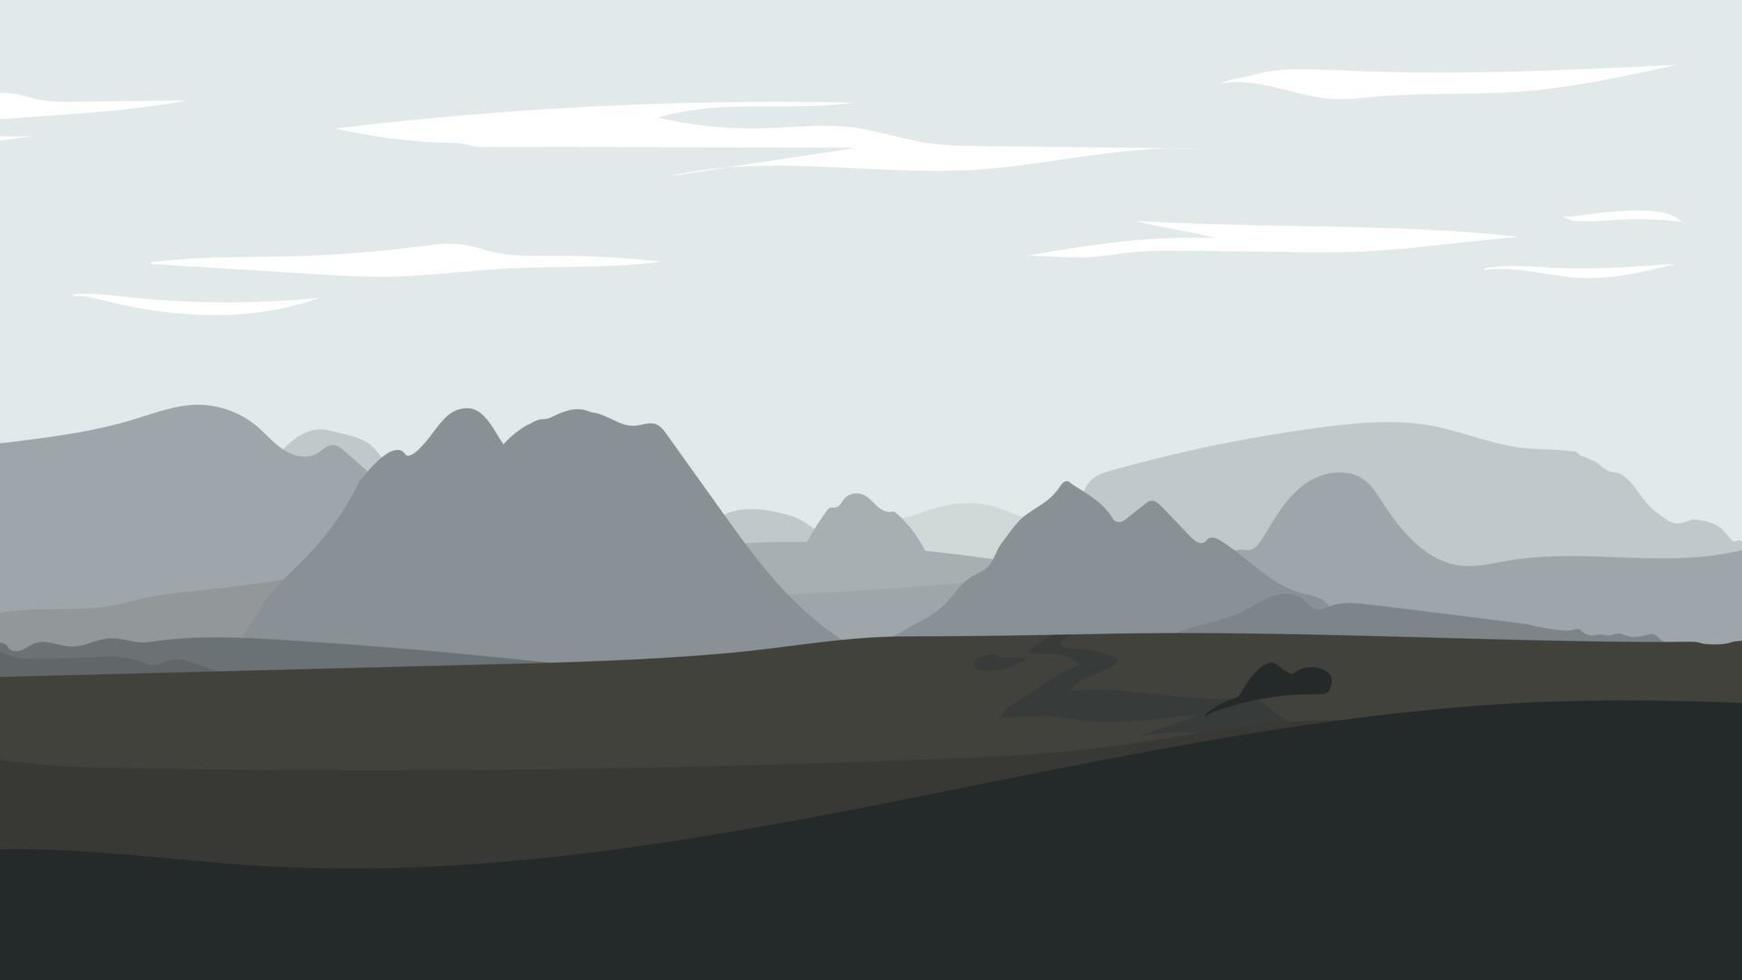 Landscape with desert with rocks and mountains. vector